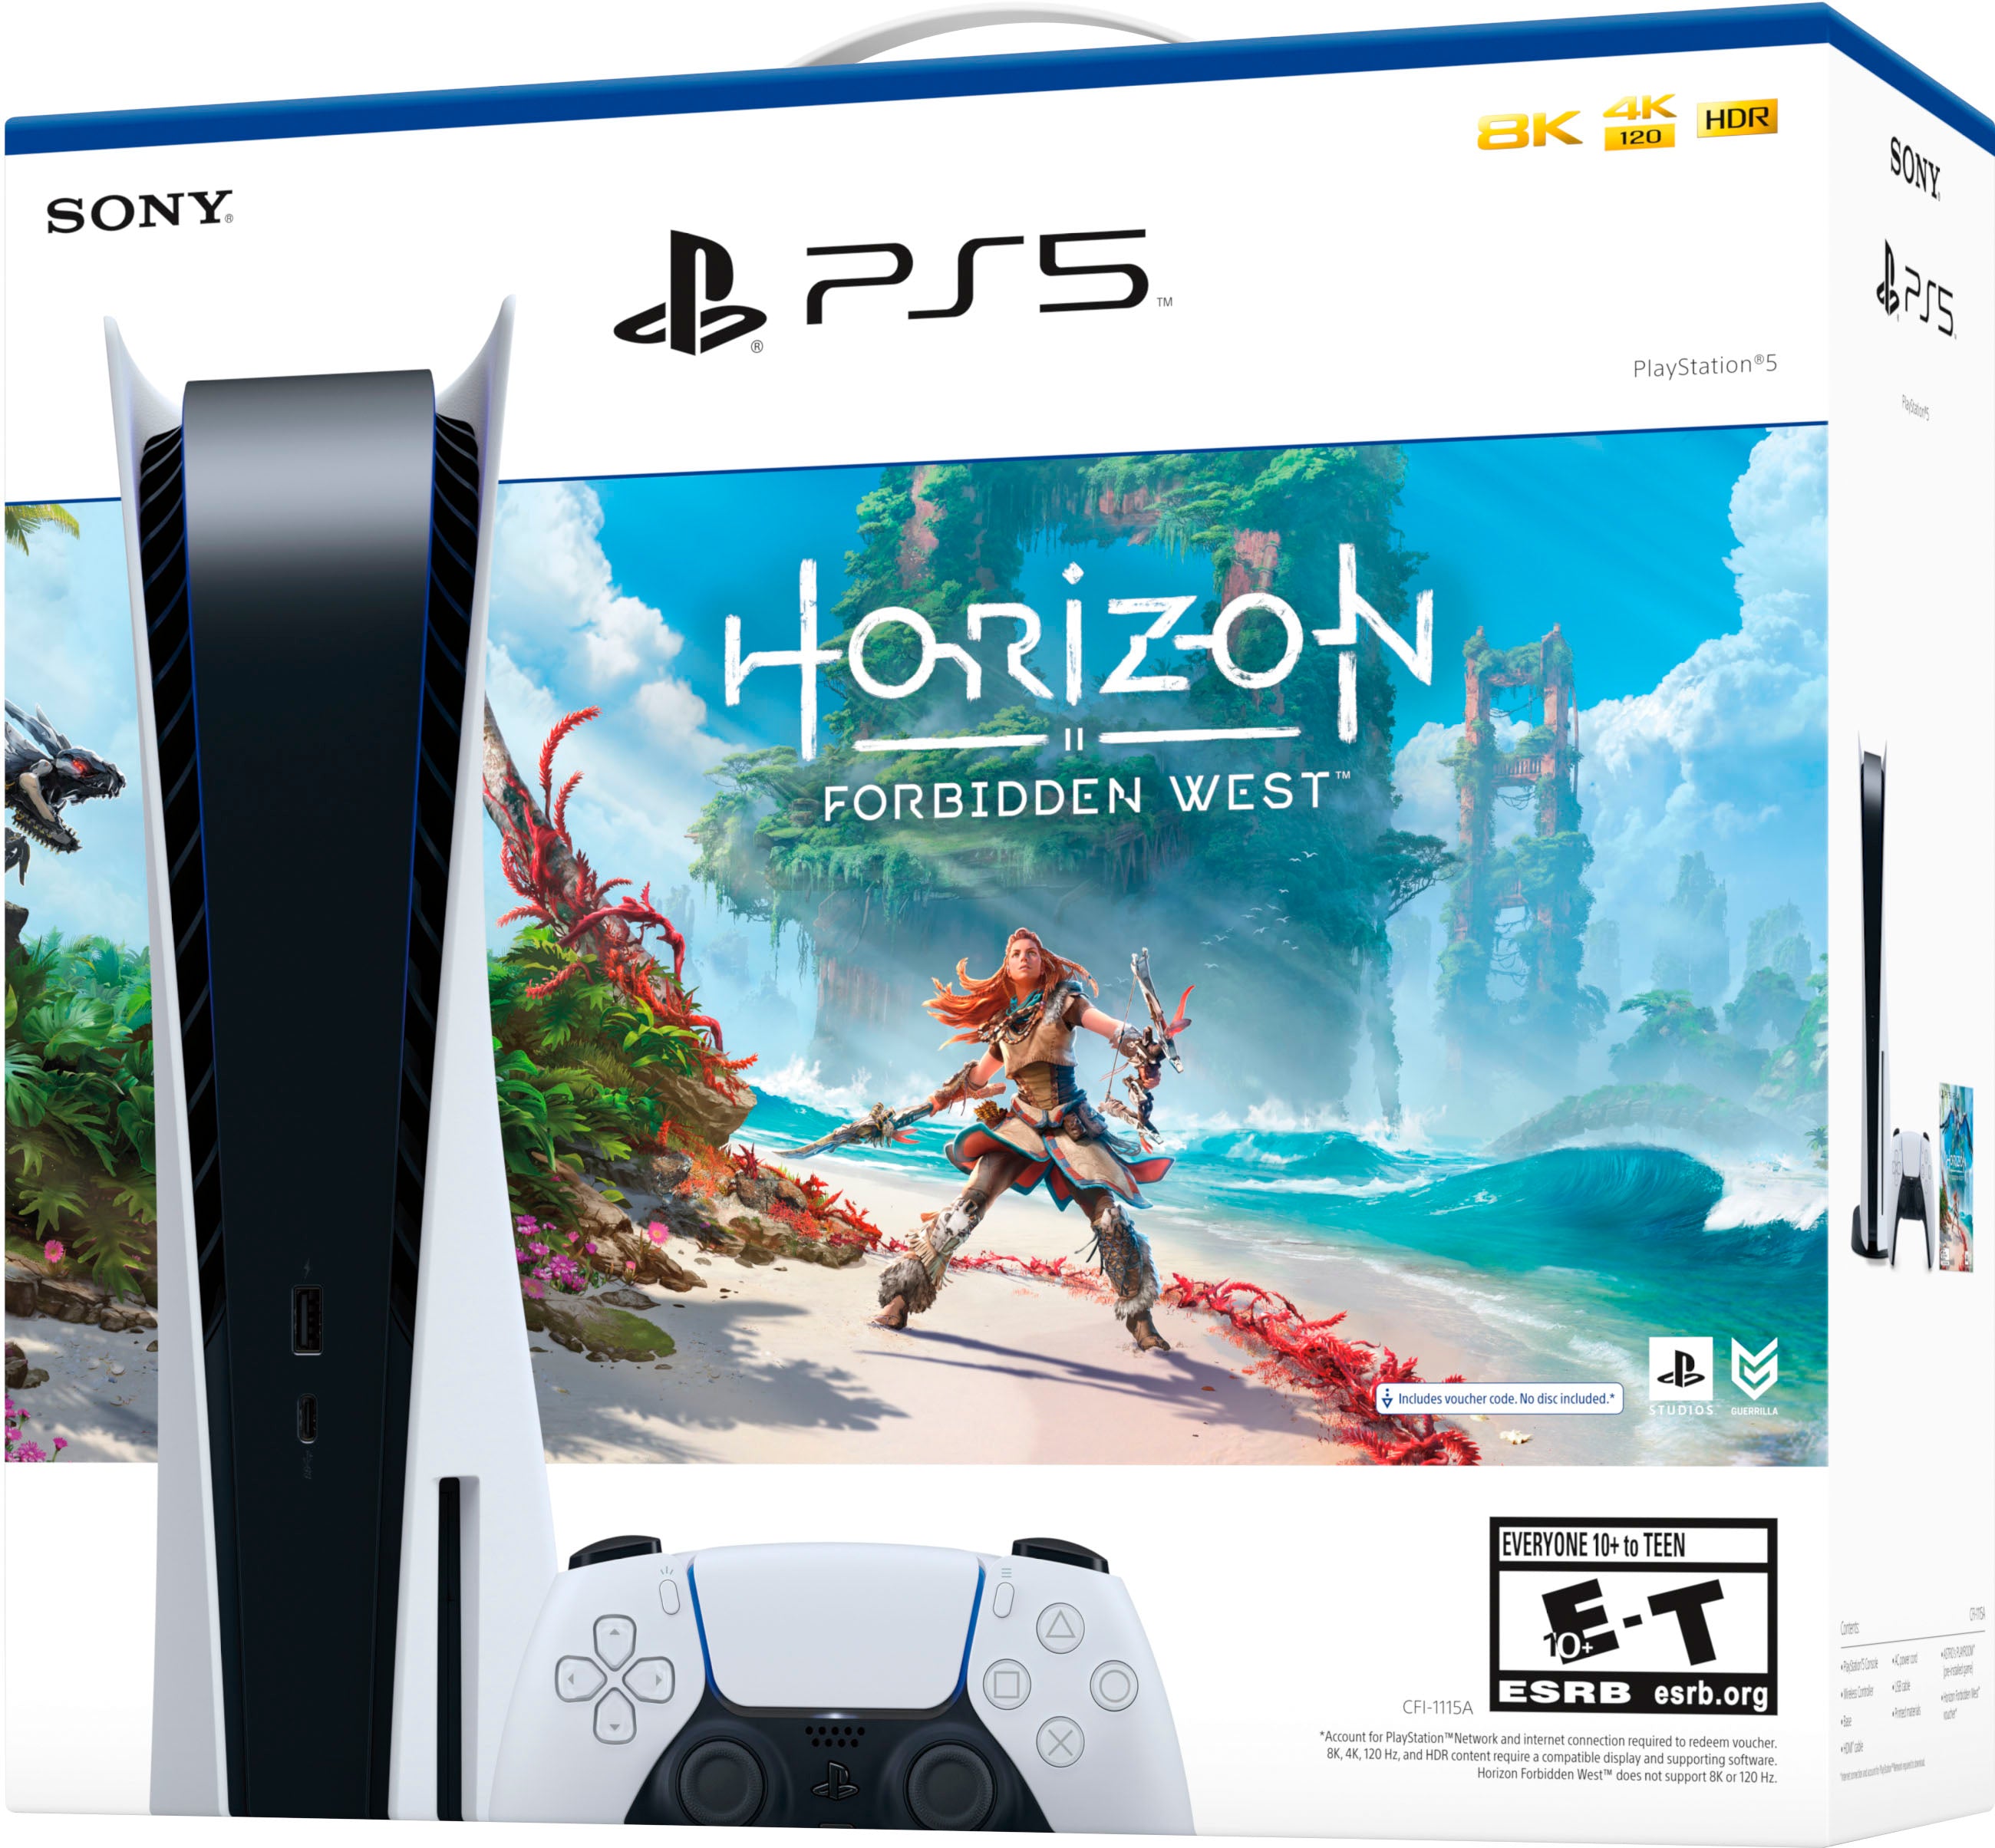 Playstation 5 1.8TB Upgraded Horizon Forbidden West Bundle with AC Valhalla and Mytrix Controller Charger